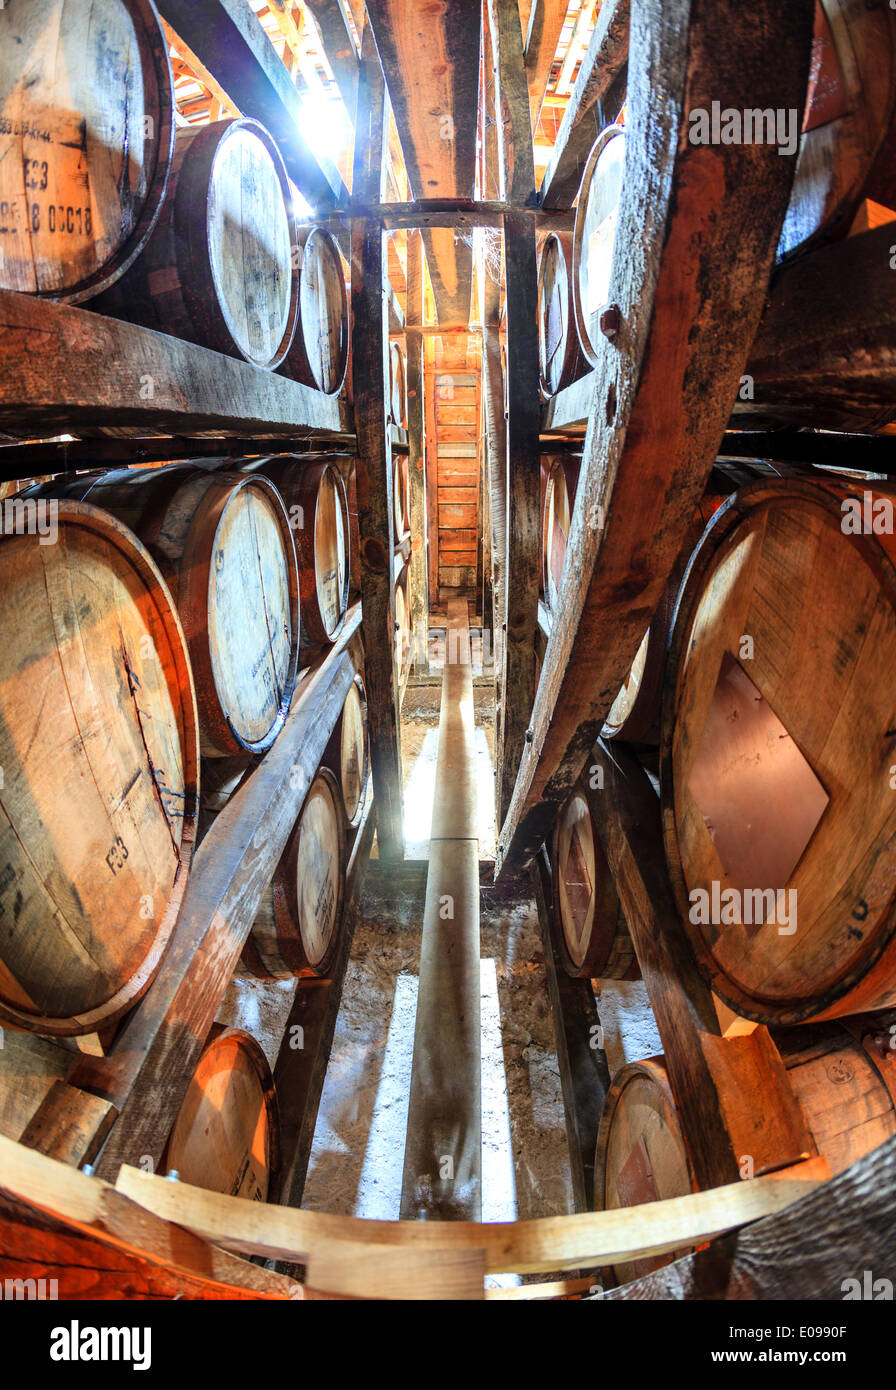 Bourbon barrels are aging in a warehouse Stock Photo